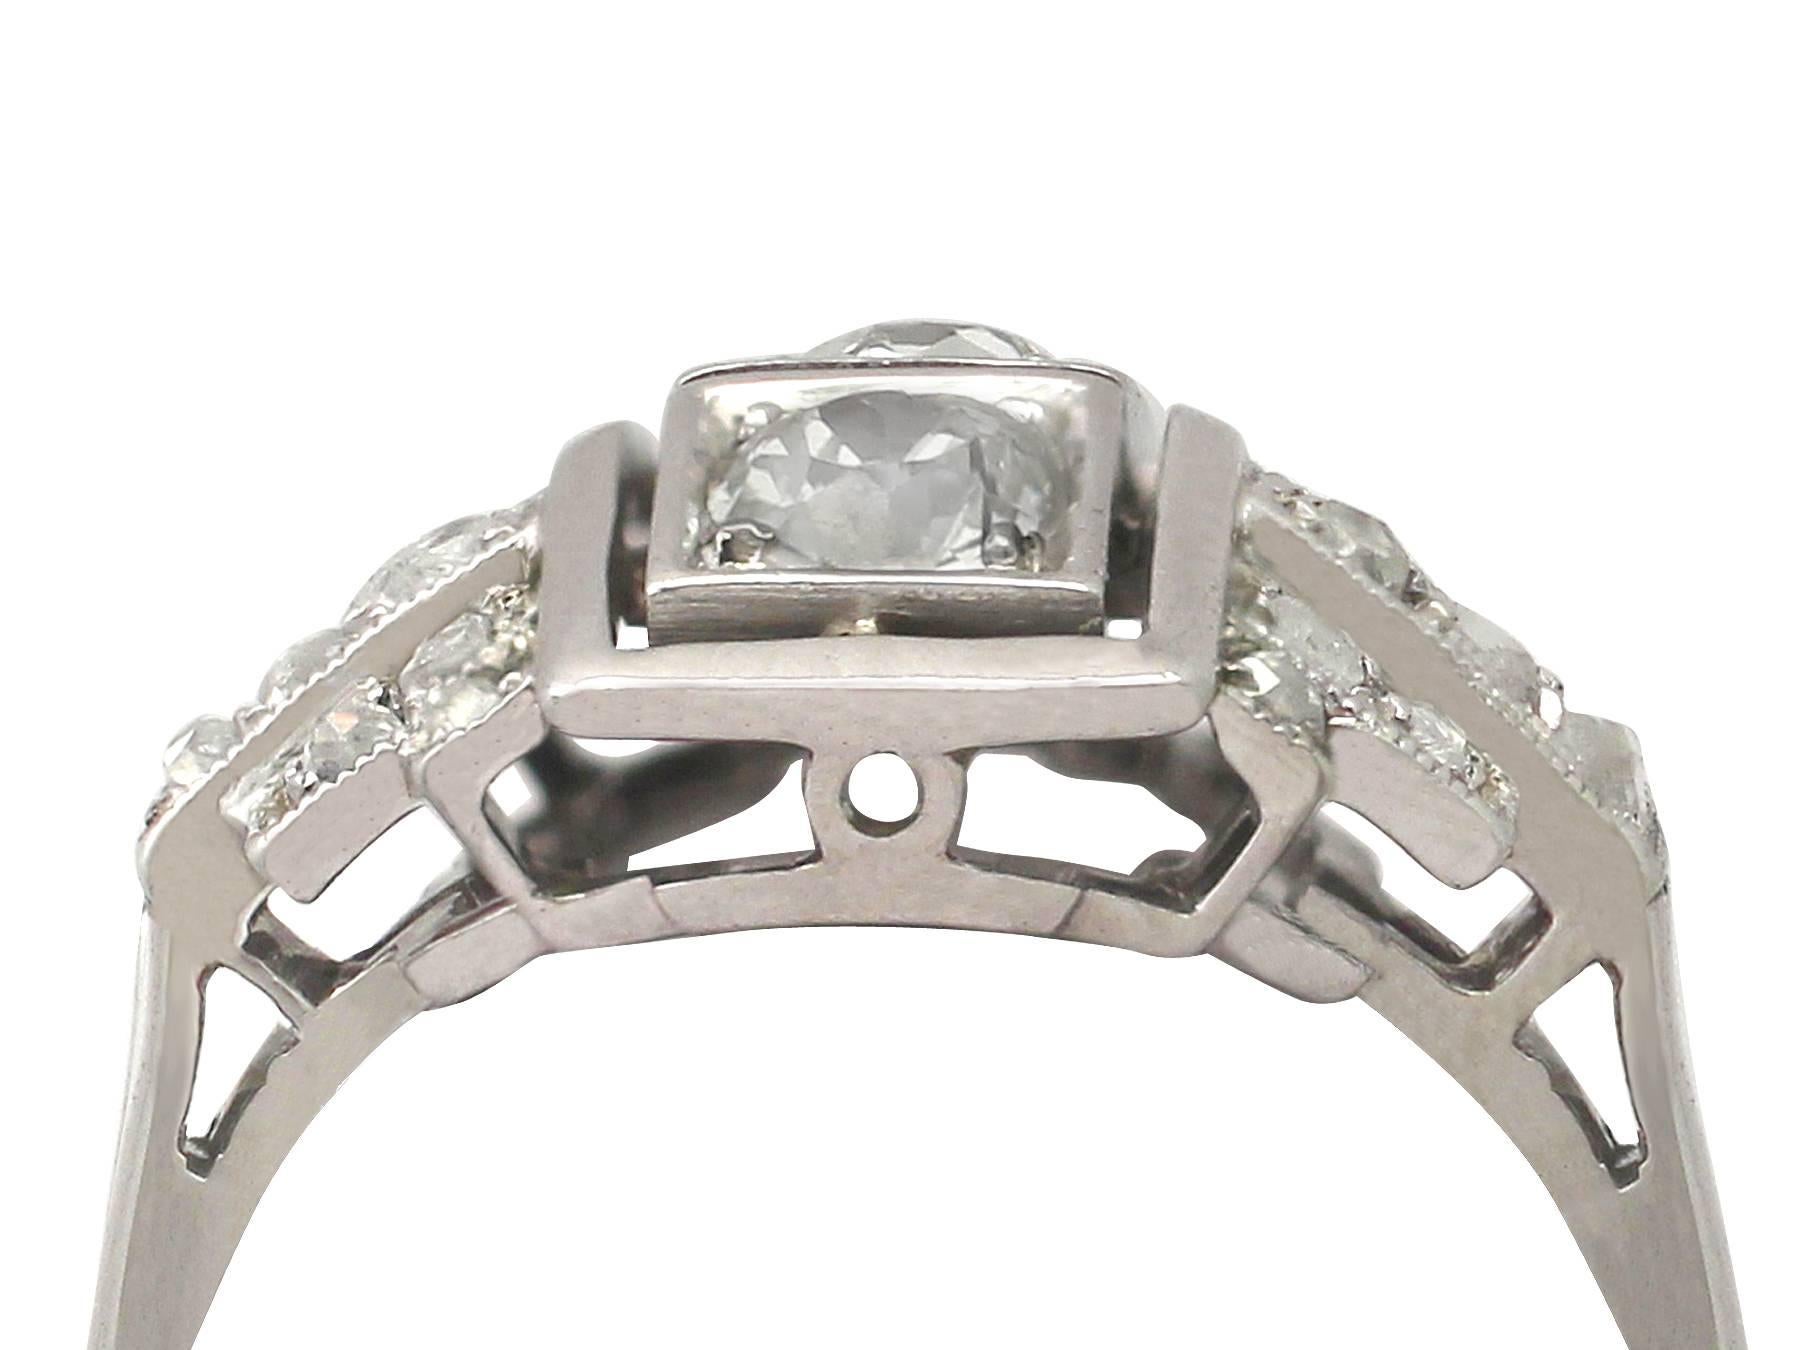 A fine and impressive Art Deco 0.73 Carat diamond and 18 karat white gold cocktail ring; part of our diverse vintage jewelry and estate jewelry collections

This fine and impressive Art Deco diamond cocktail ring has been crafted in 18k white